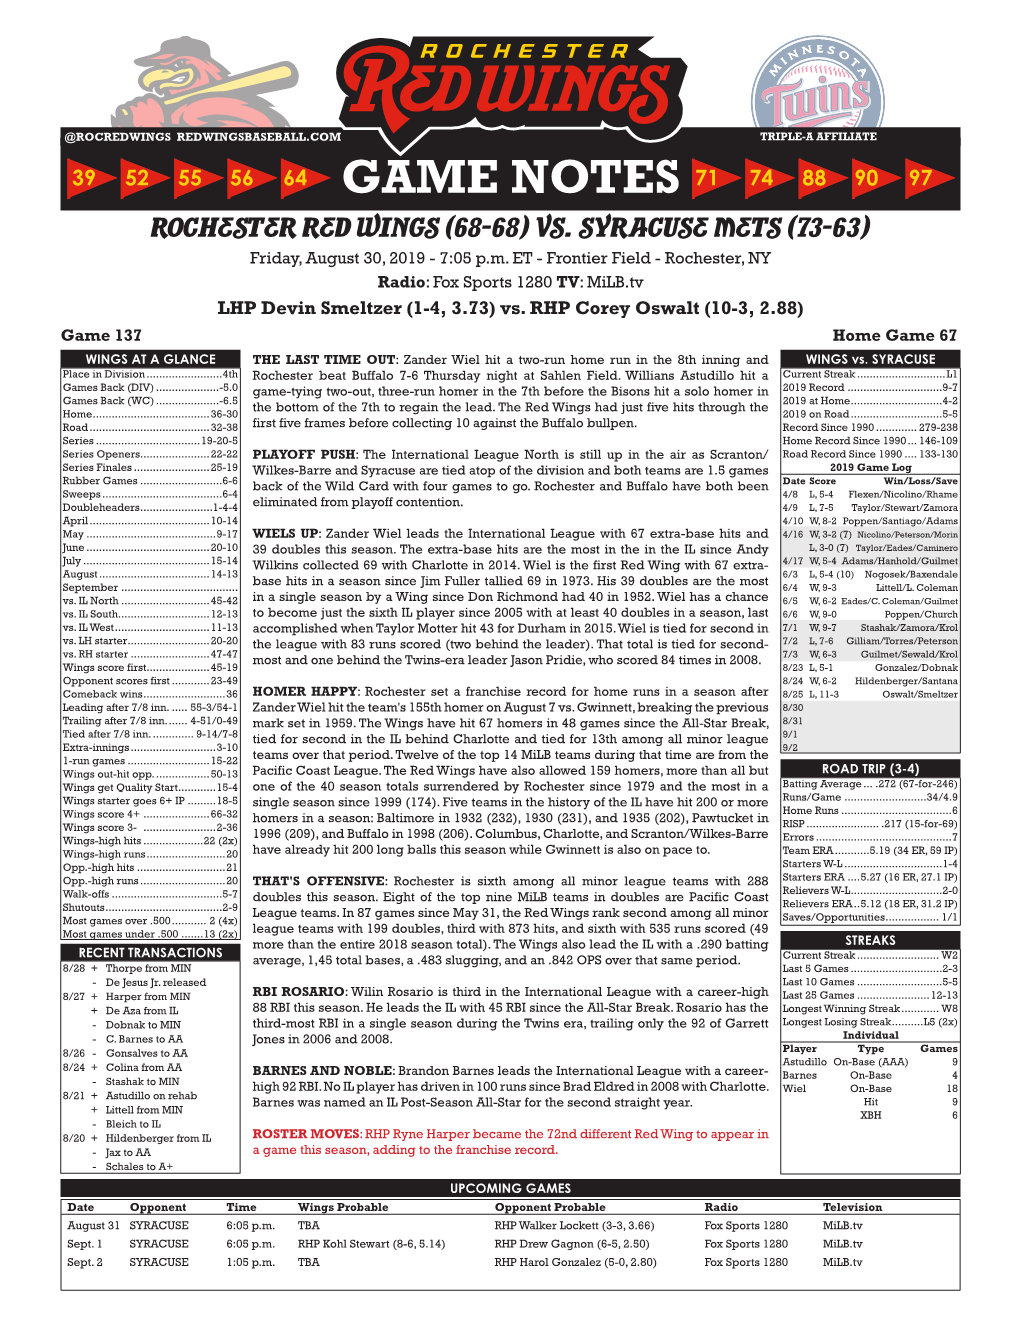 GAME NOTES Rochester Red Wings (68-68) Vs